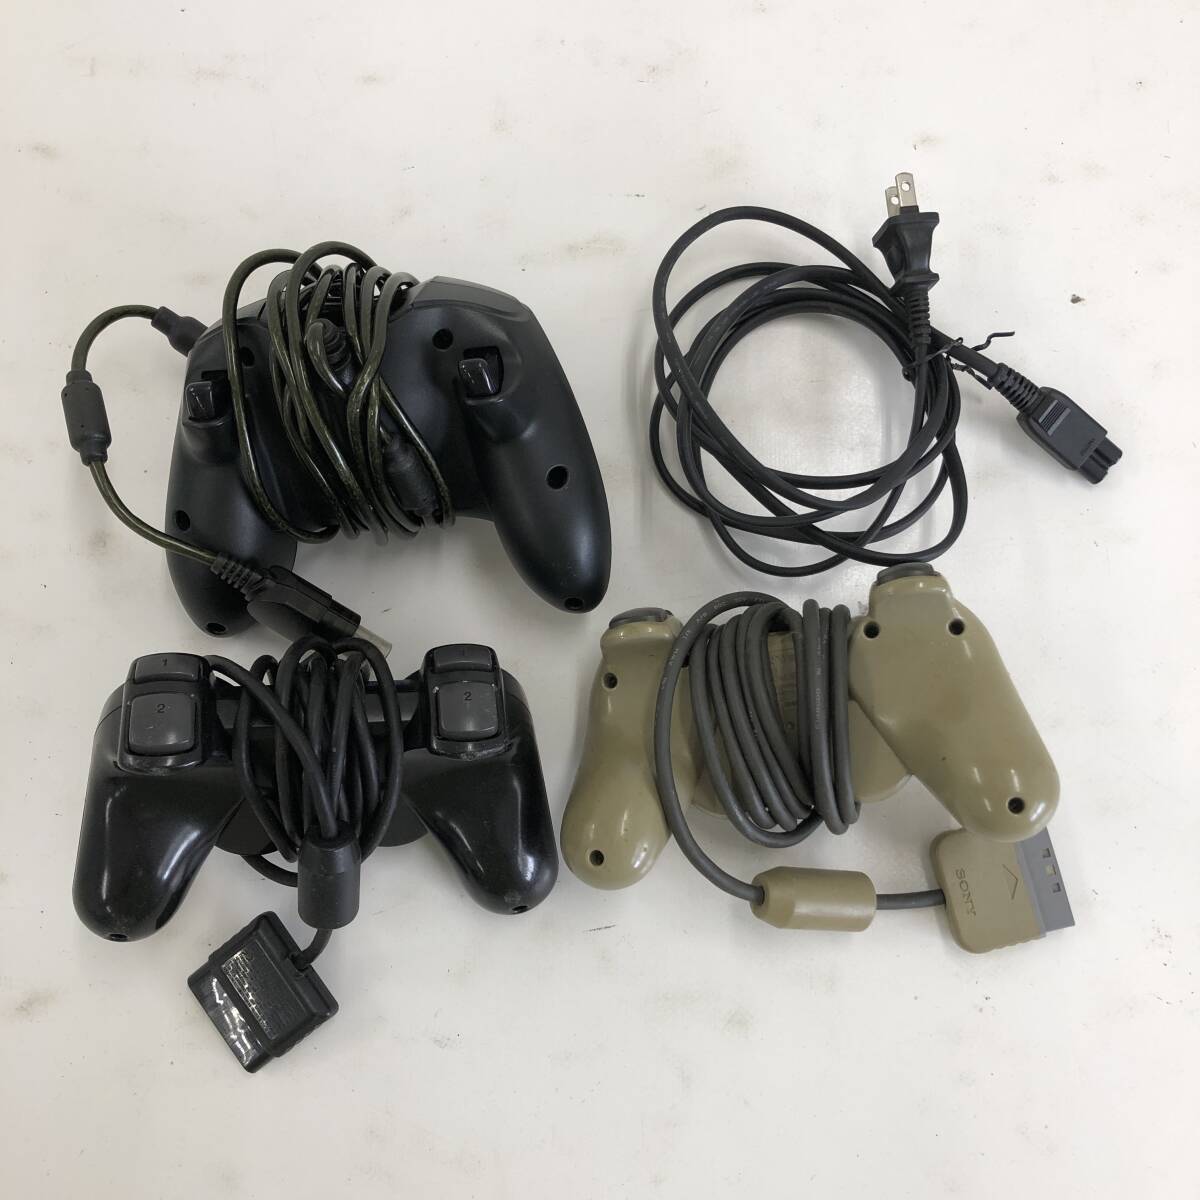 [1 jpy ~] game machine body controller set sale Playstation3 PS3 Playstation2 PS2 other * parts parts taking .[ junk ]